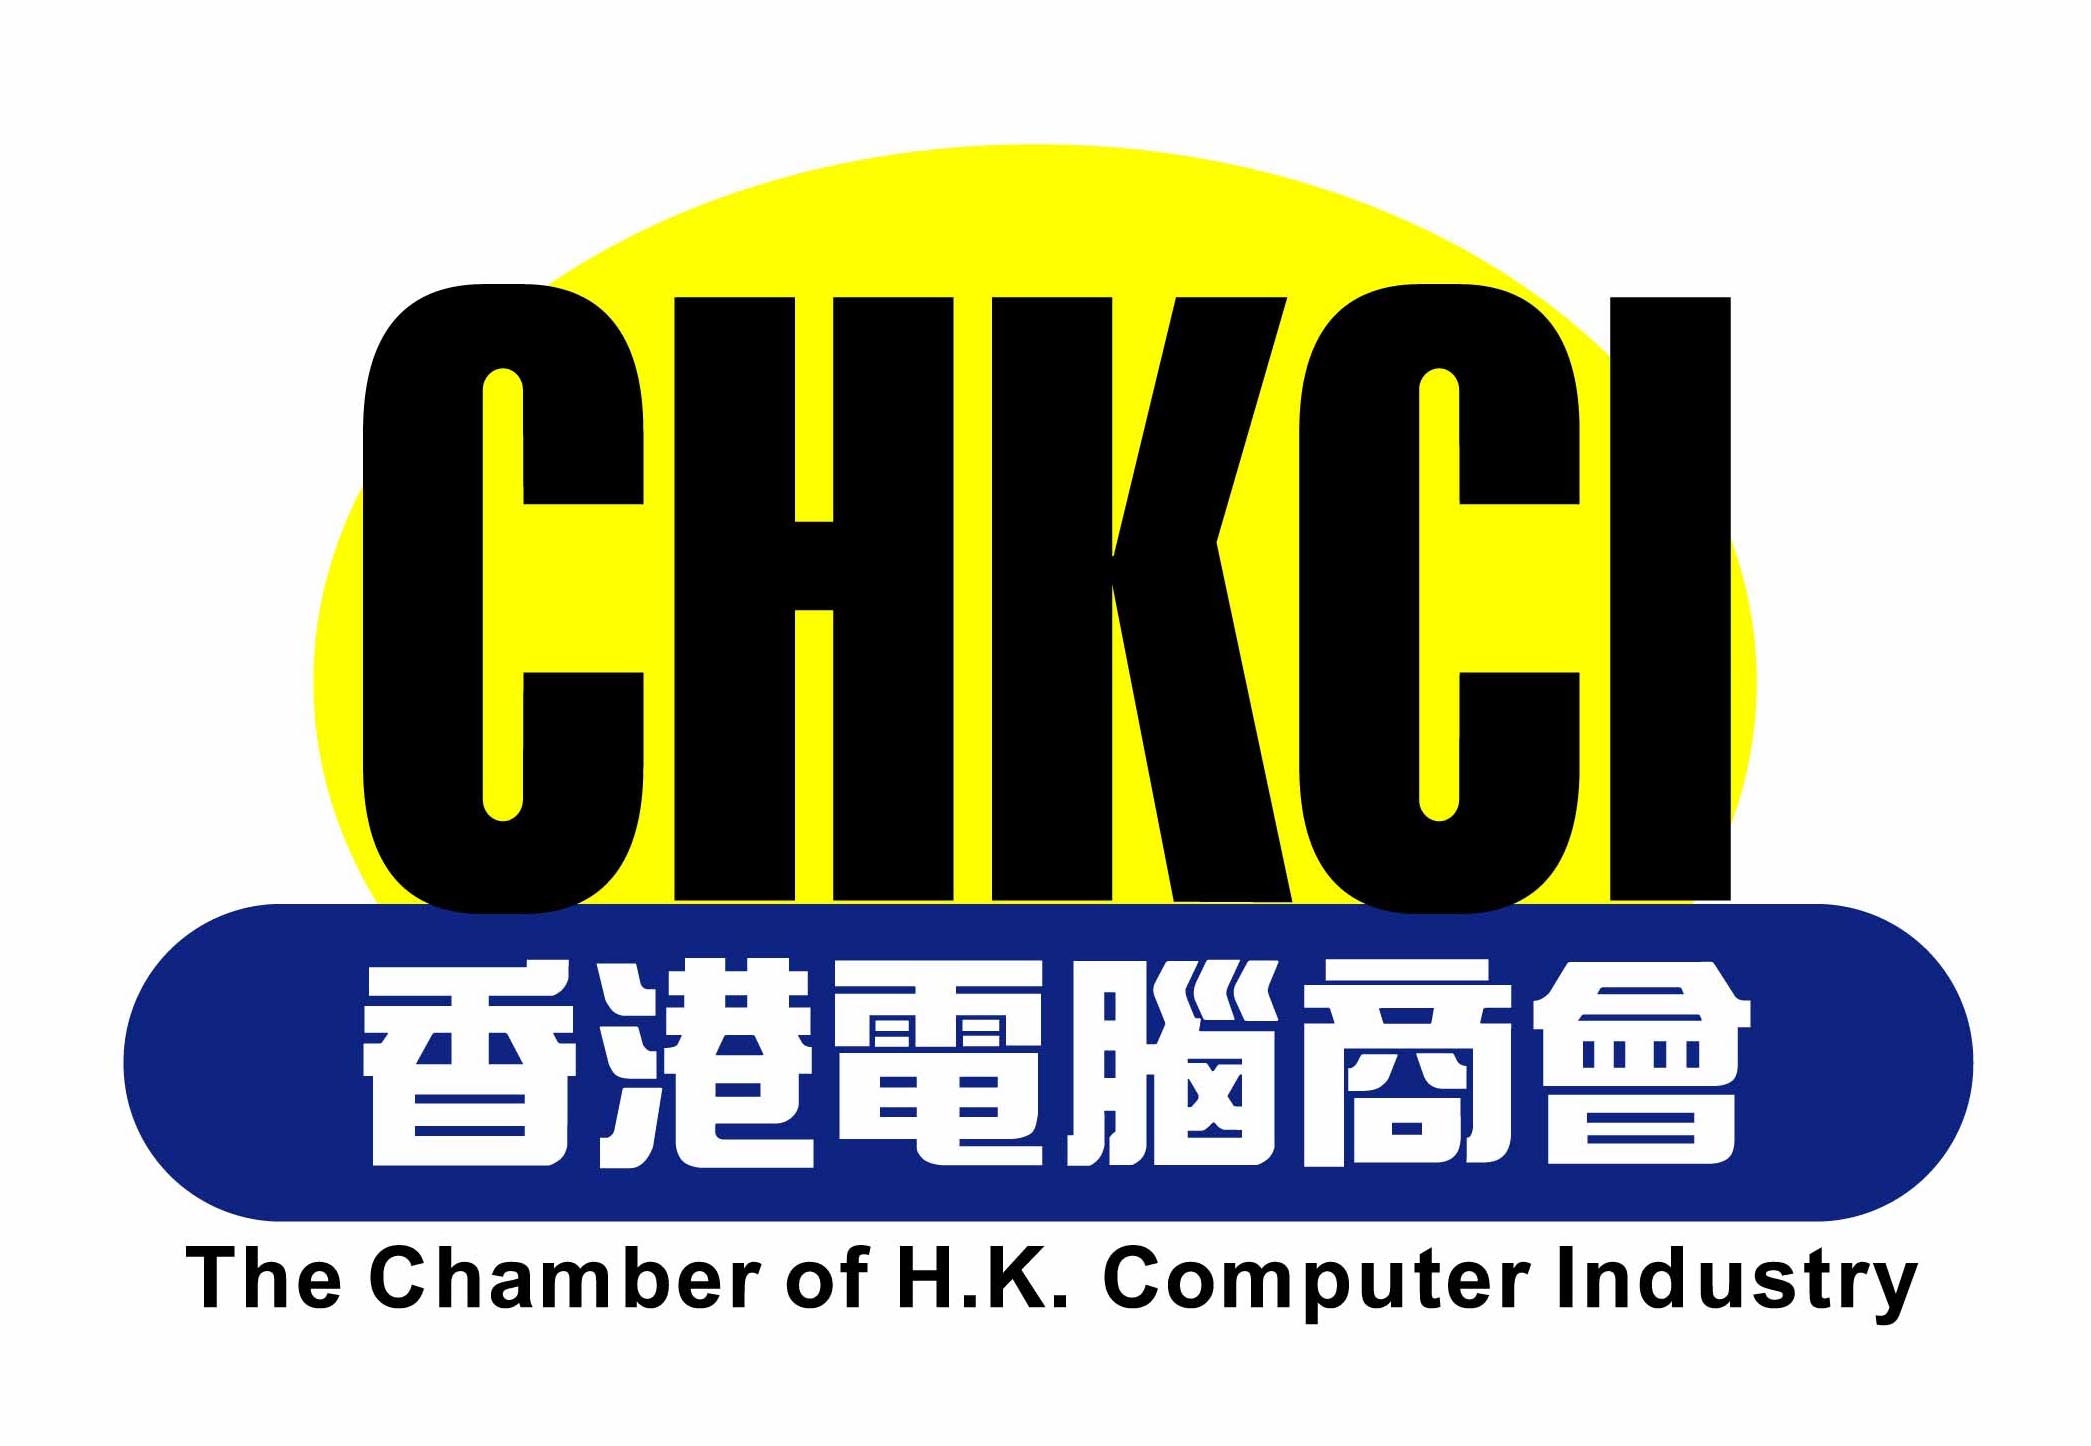 The Chamber of HK Computer Industry (CHKCI)